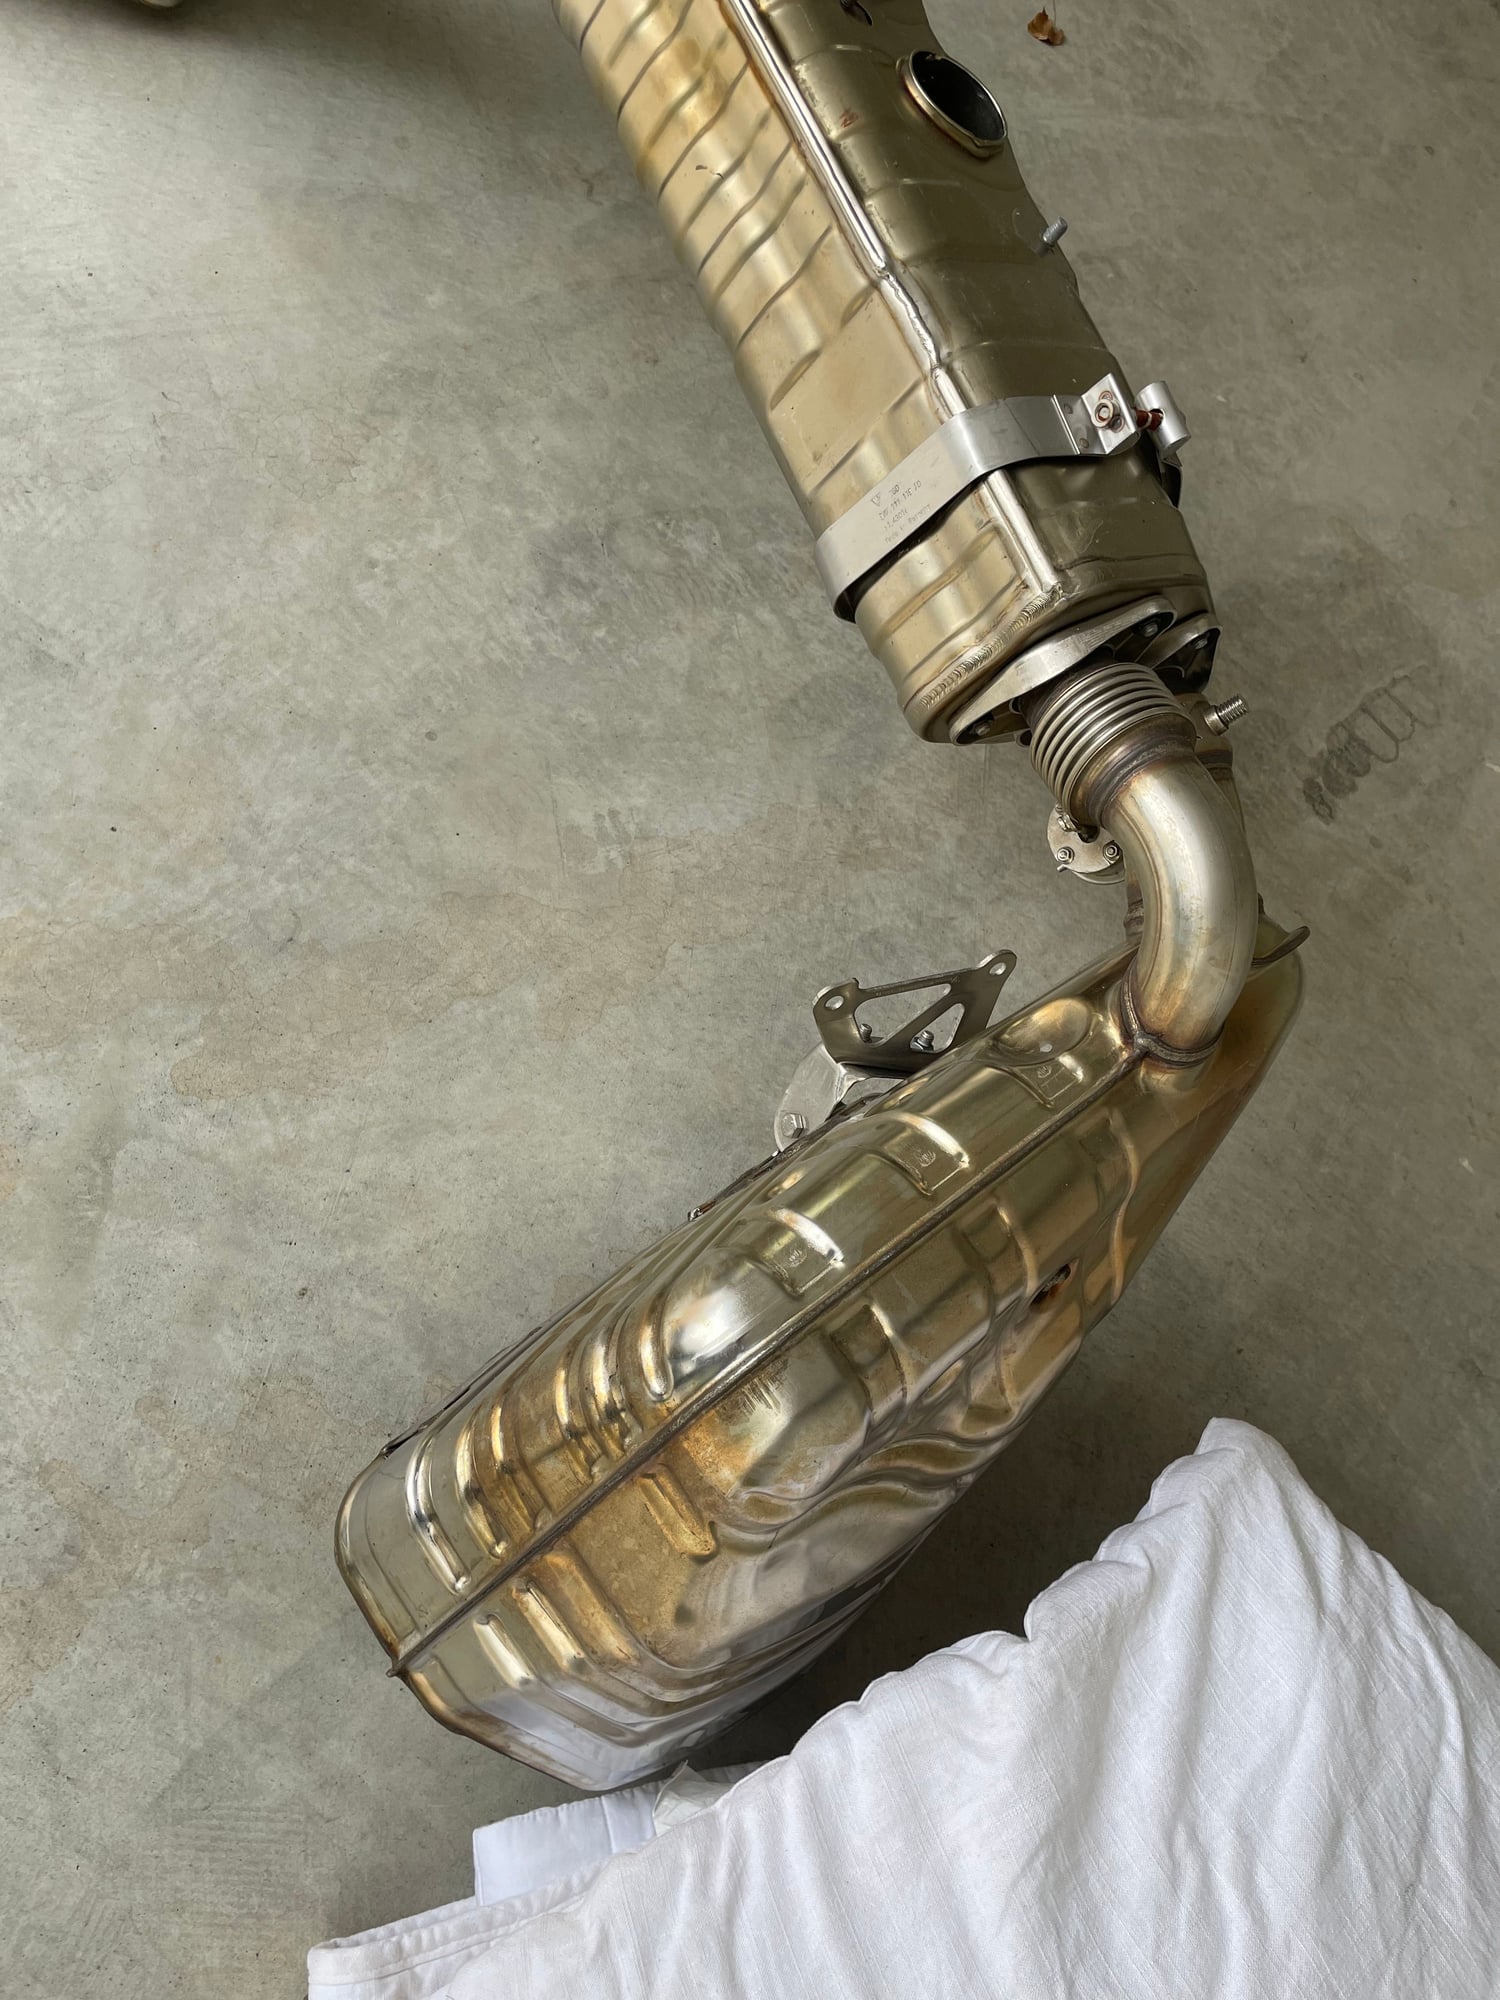 Engine - Exhaust - OEM 991.2 GT3RS Exhaust (titanium center + side mufflers) - New - 0  All Models - Charlotte, NC 28211, United States